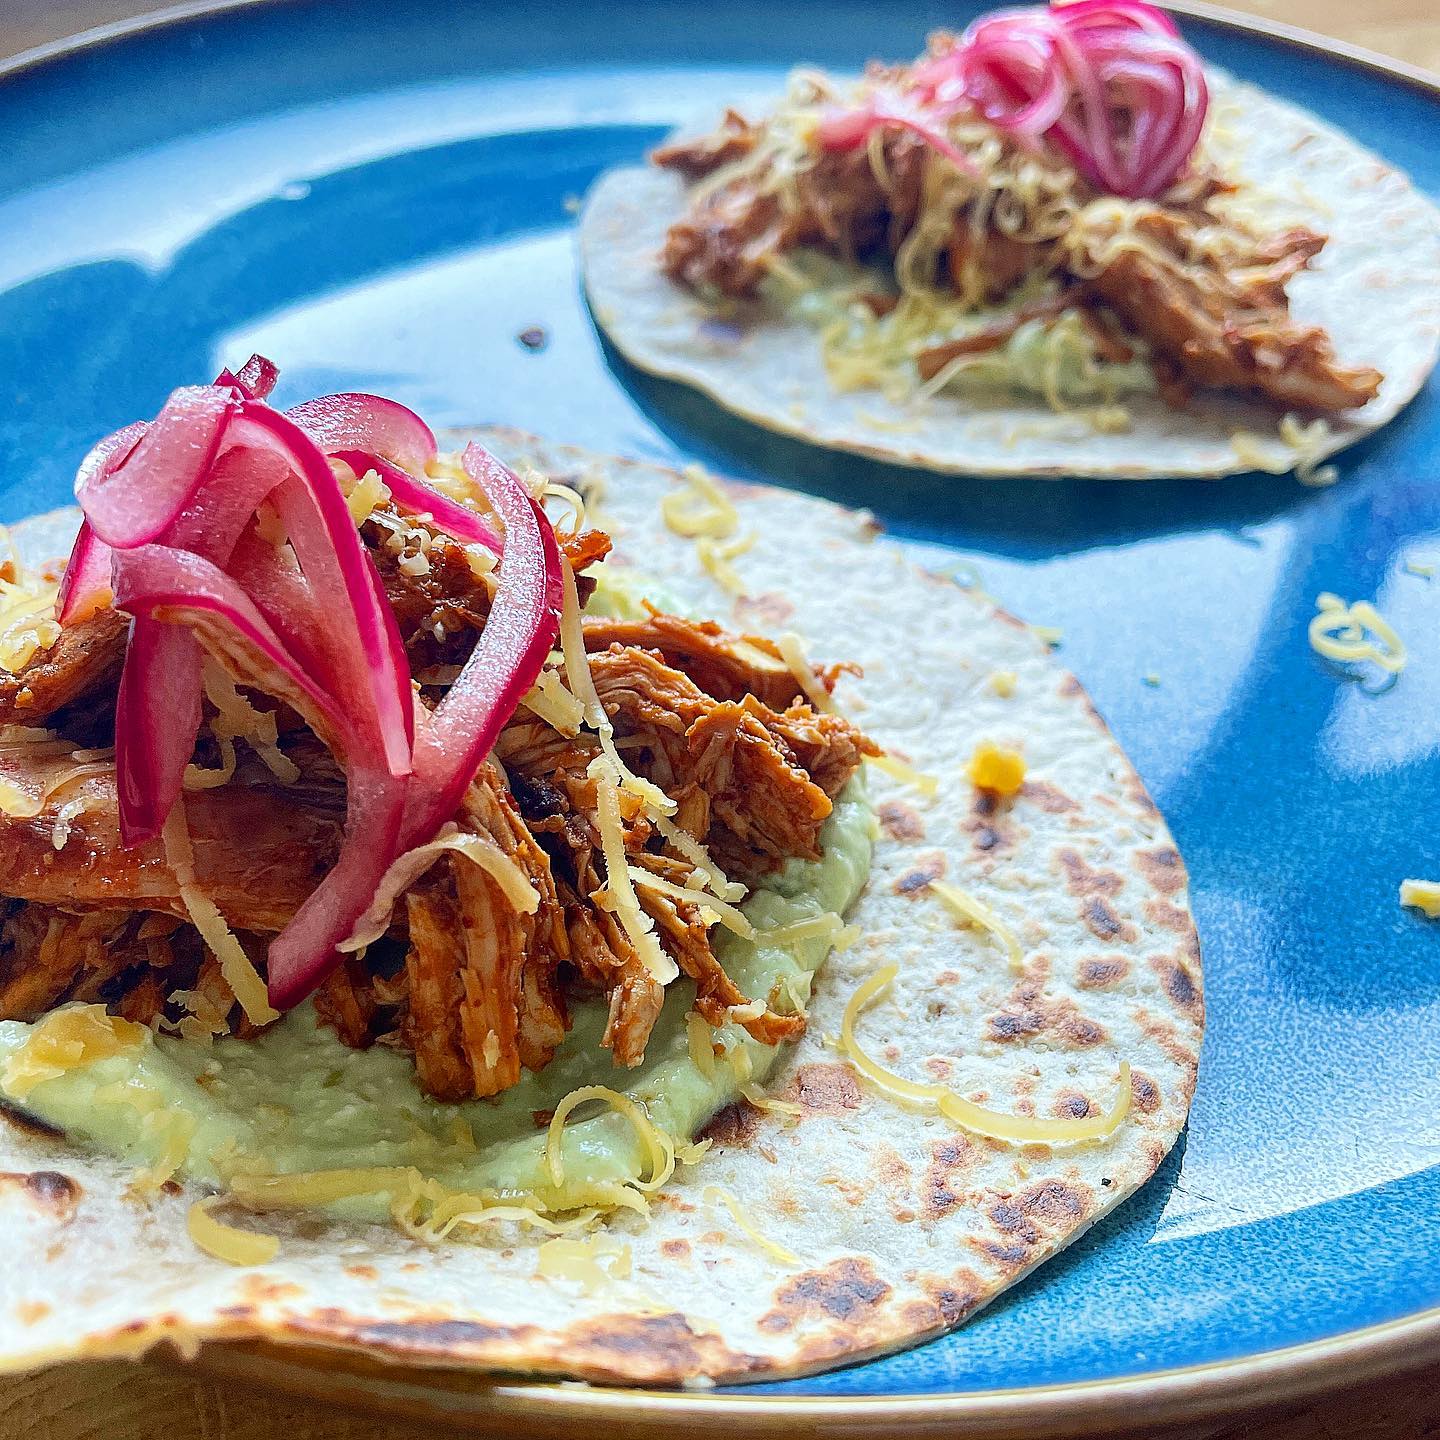 Chicken Tinga Tacos with Avocado Crema, Cheese and Pickled Onions. 🇲🇽 

#tacos #chickentinga #chickentacos #mexicanfood #documentingmydinner #foodblogger #chickenrecipes #food #foodiesofinstagram #aberdeen